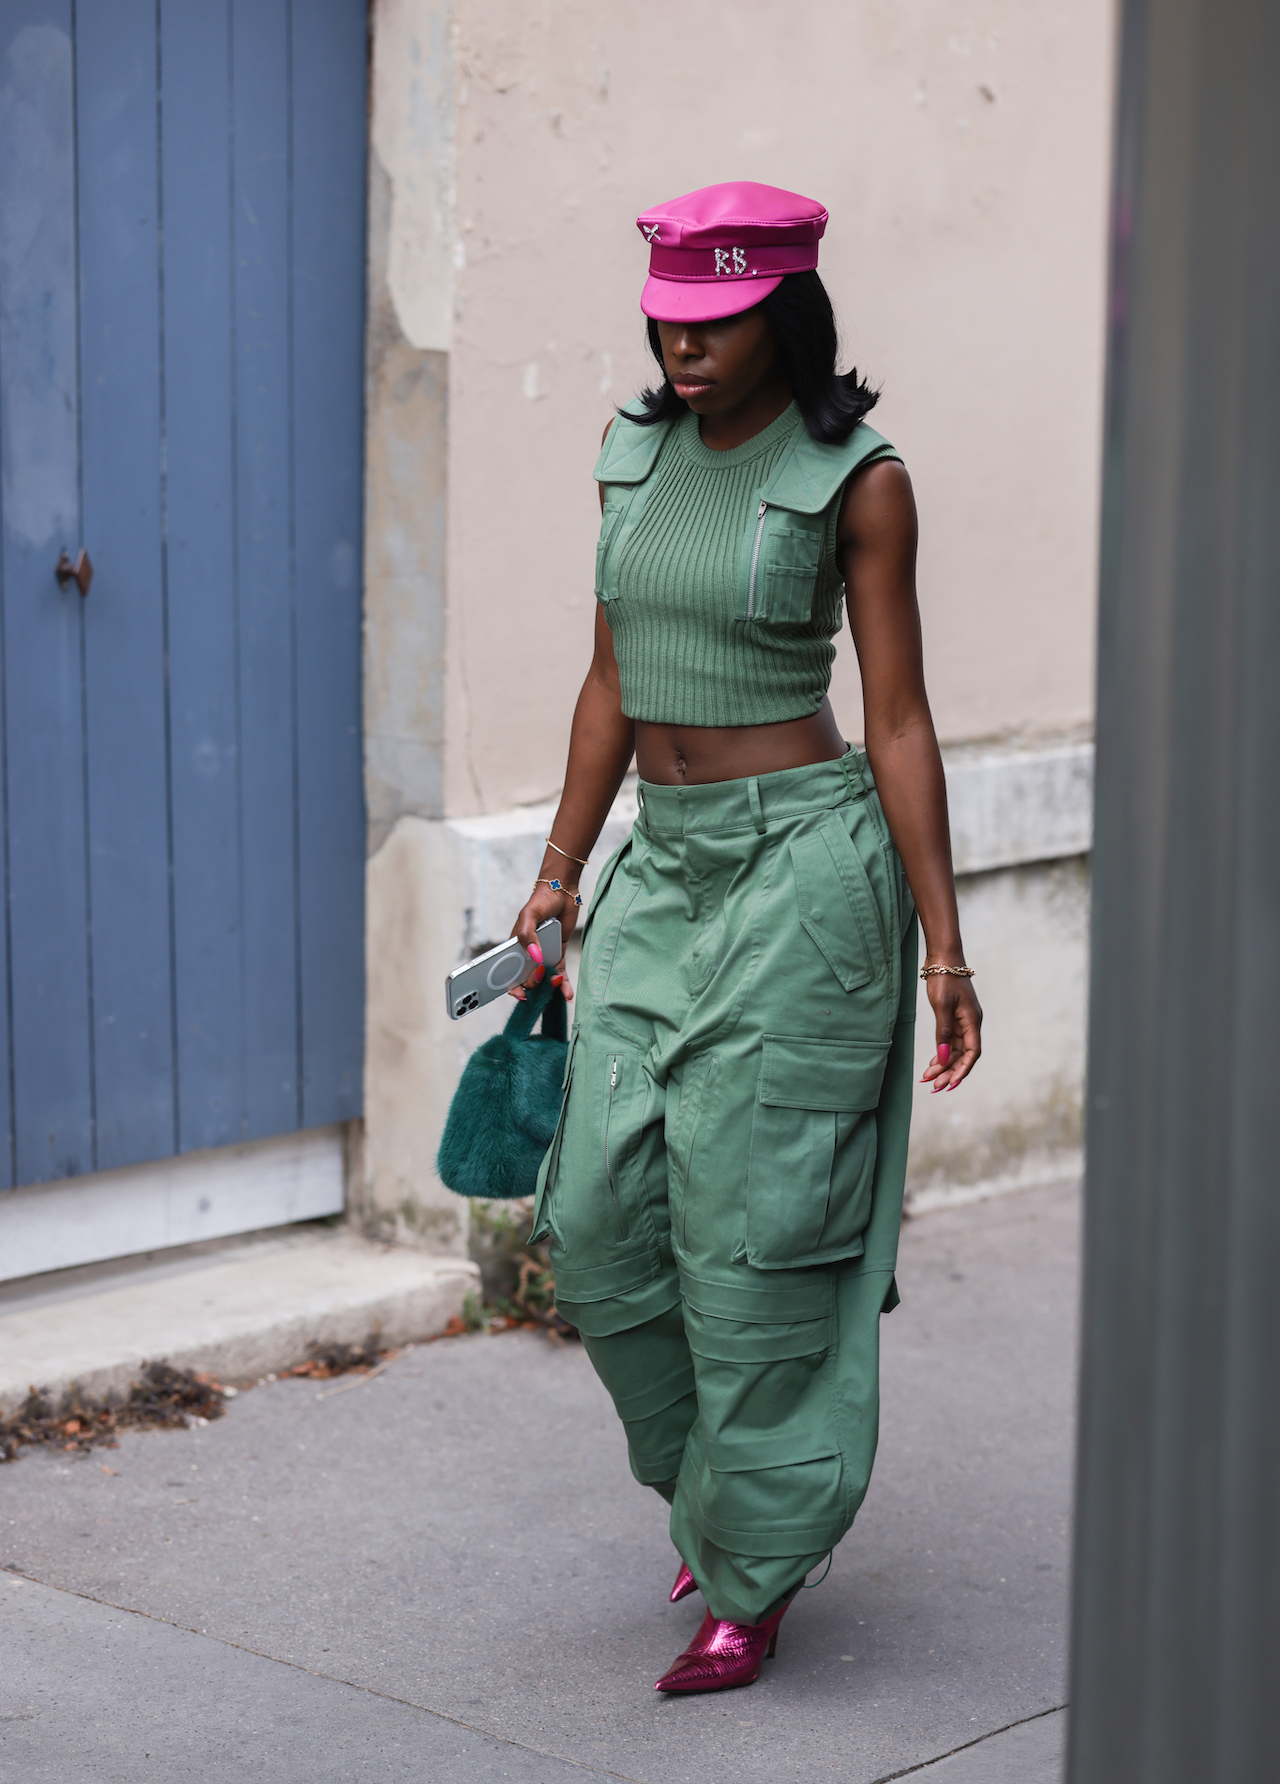 Cargo Pants Trend: 7 Styles To Shop for Spring – StyleCaster